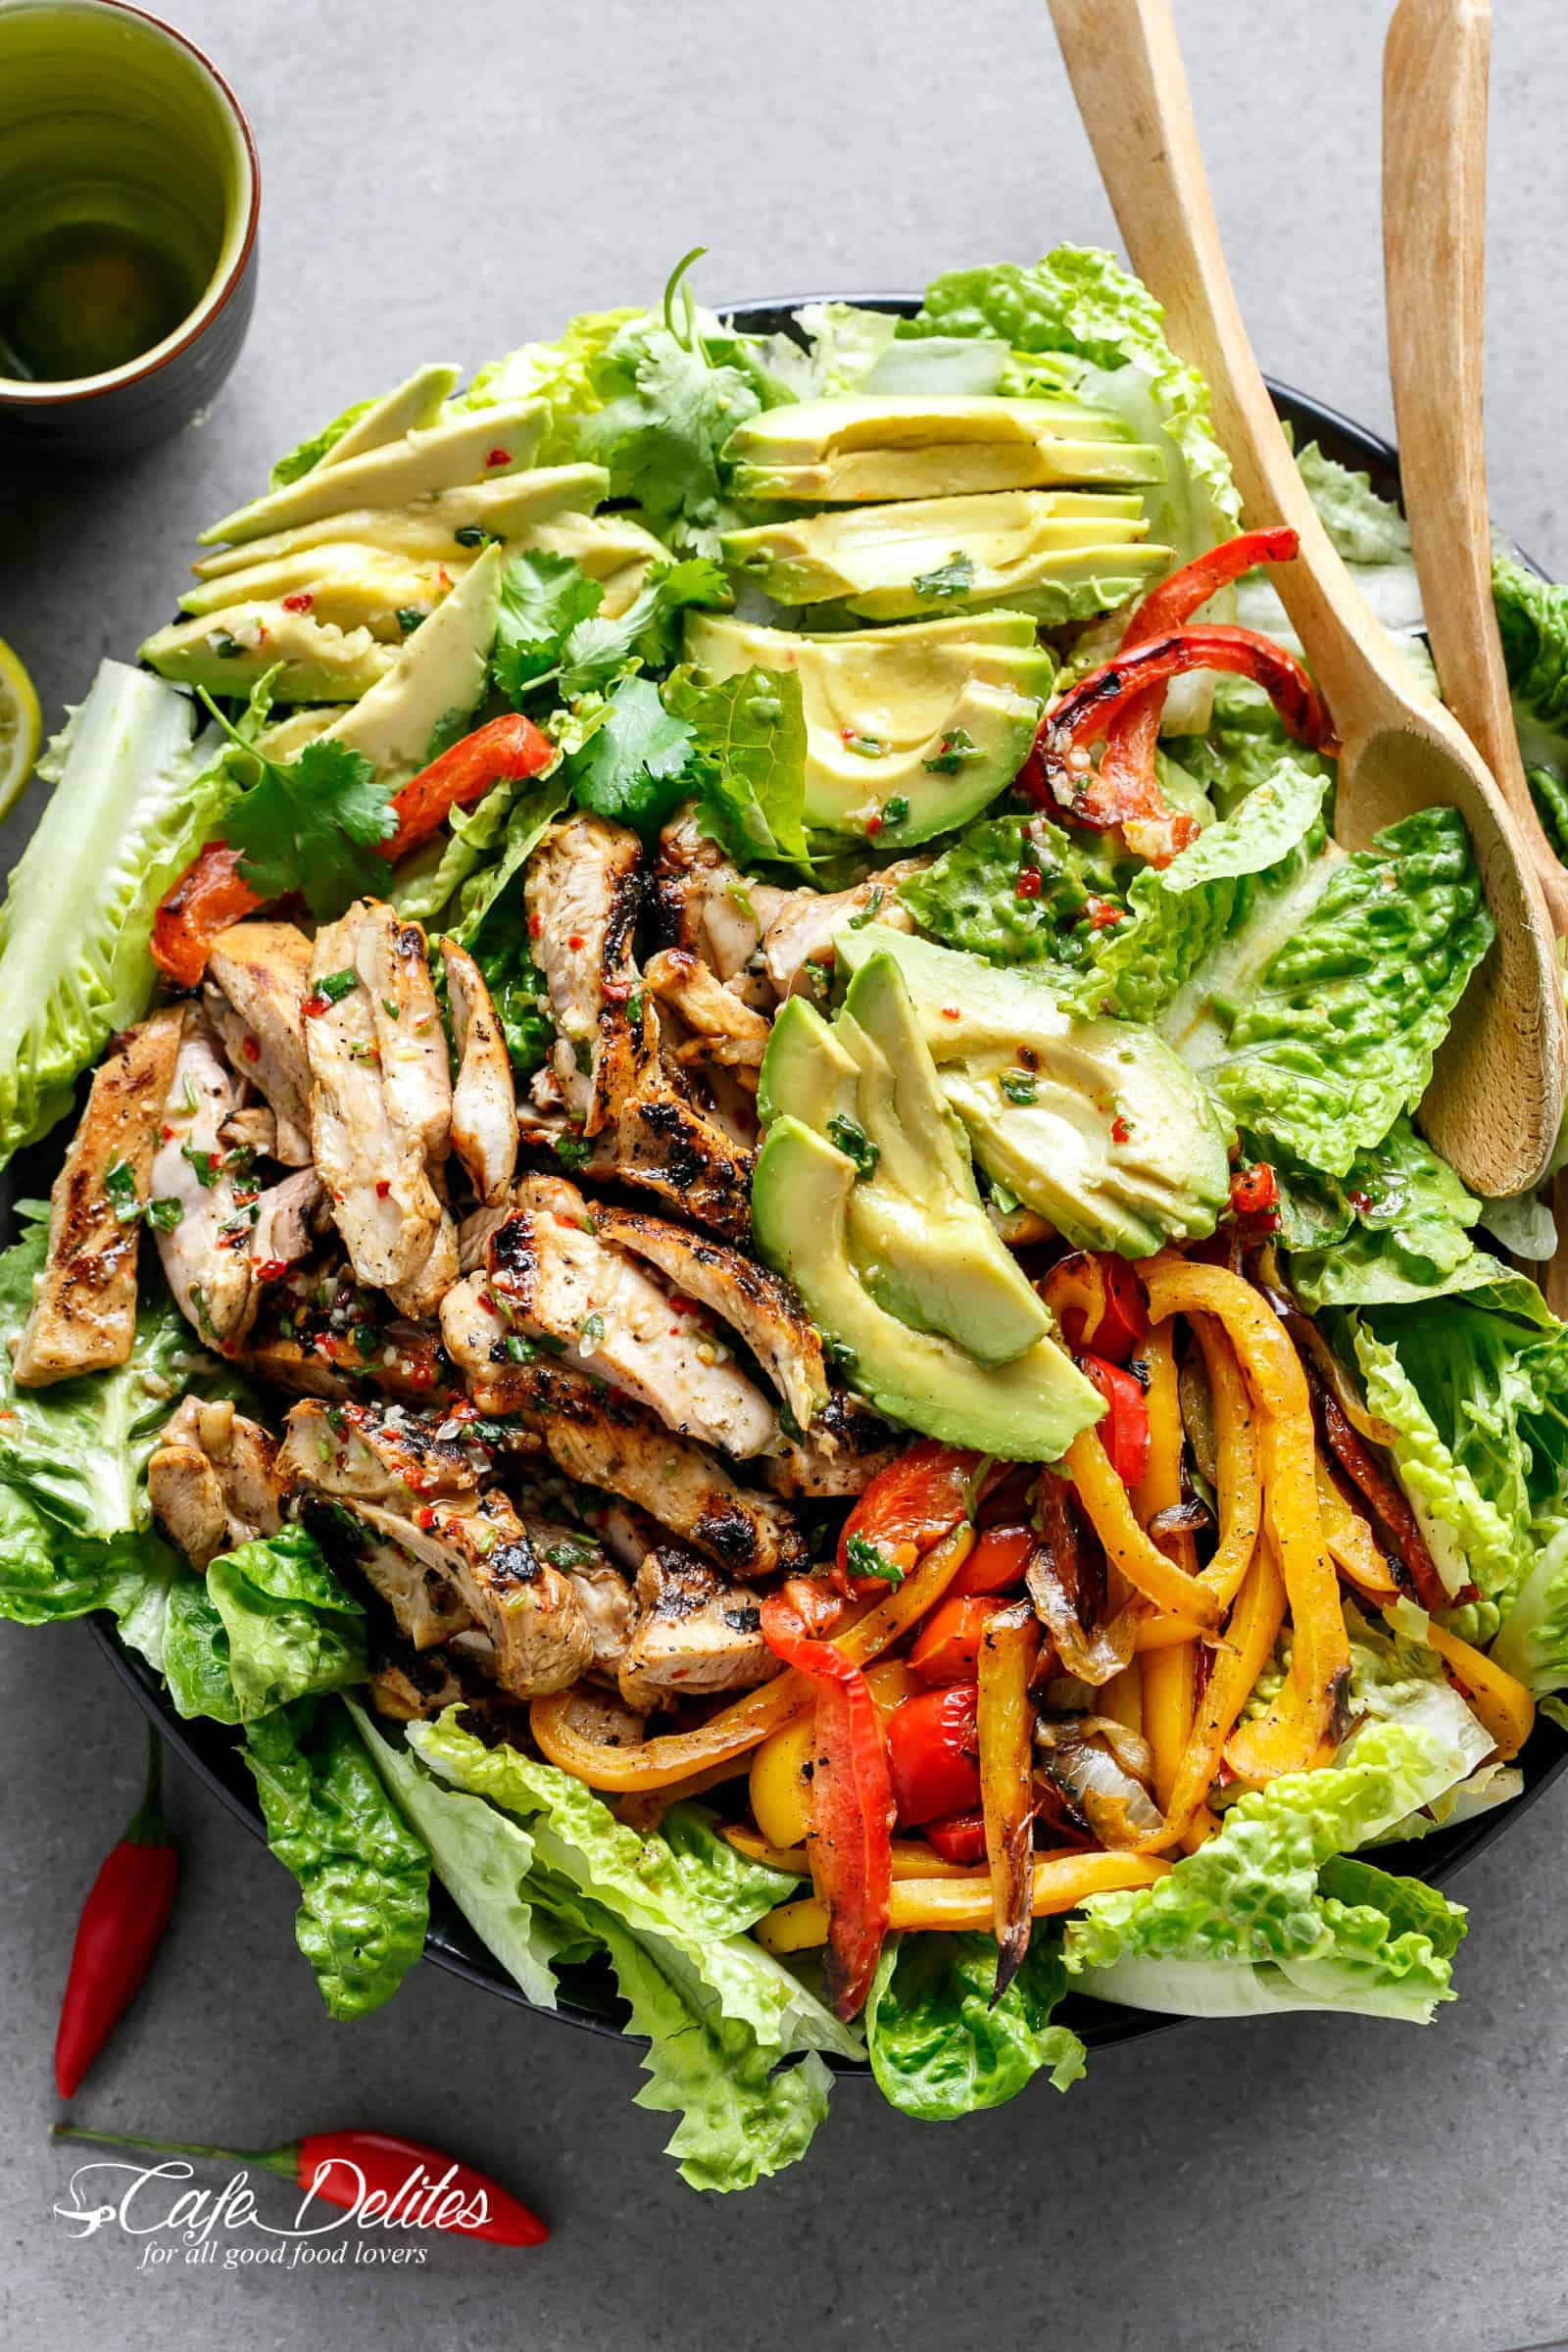 How Long Is Chicken Salad Good For
 Grilled Chili Lime Chicken Fajita Salad VIDEO Cafe